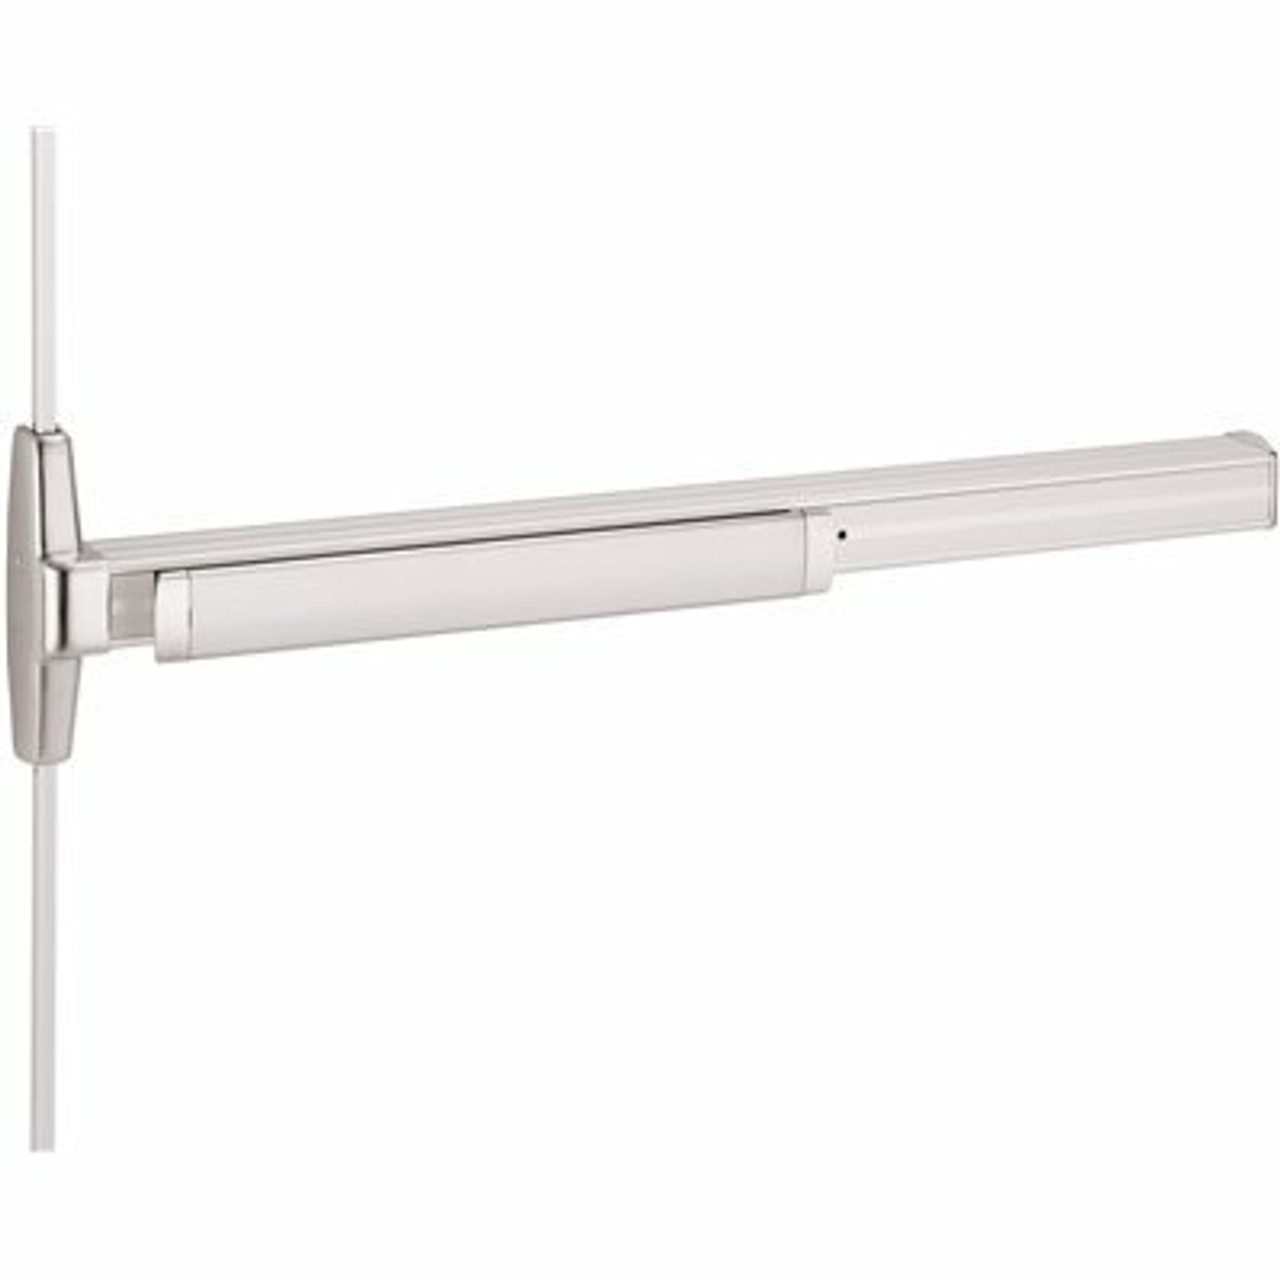 Von Duprin Grade-1 Satin Chrome Surface Vertical Rod Exit Device, Non-Handed, Exit Only - 310013216